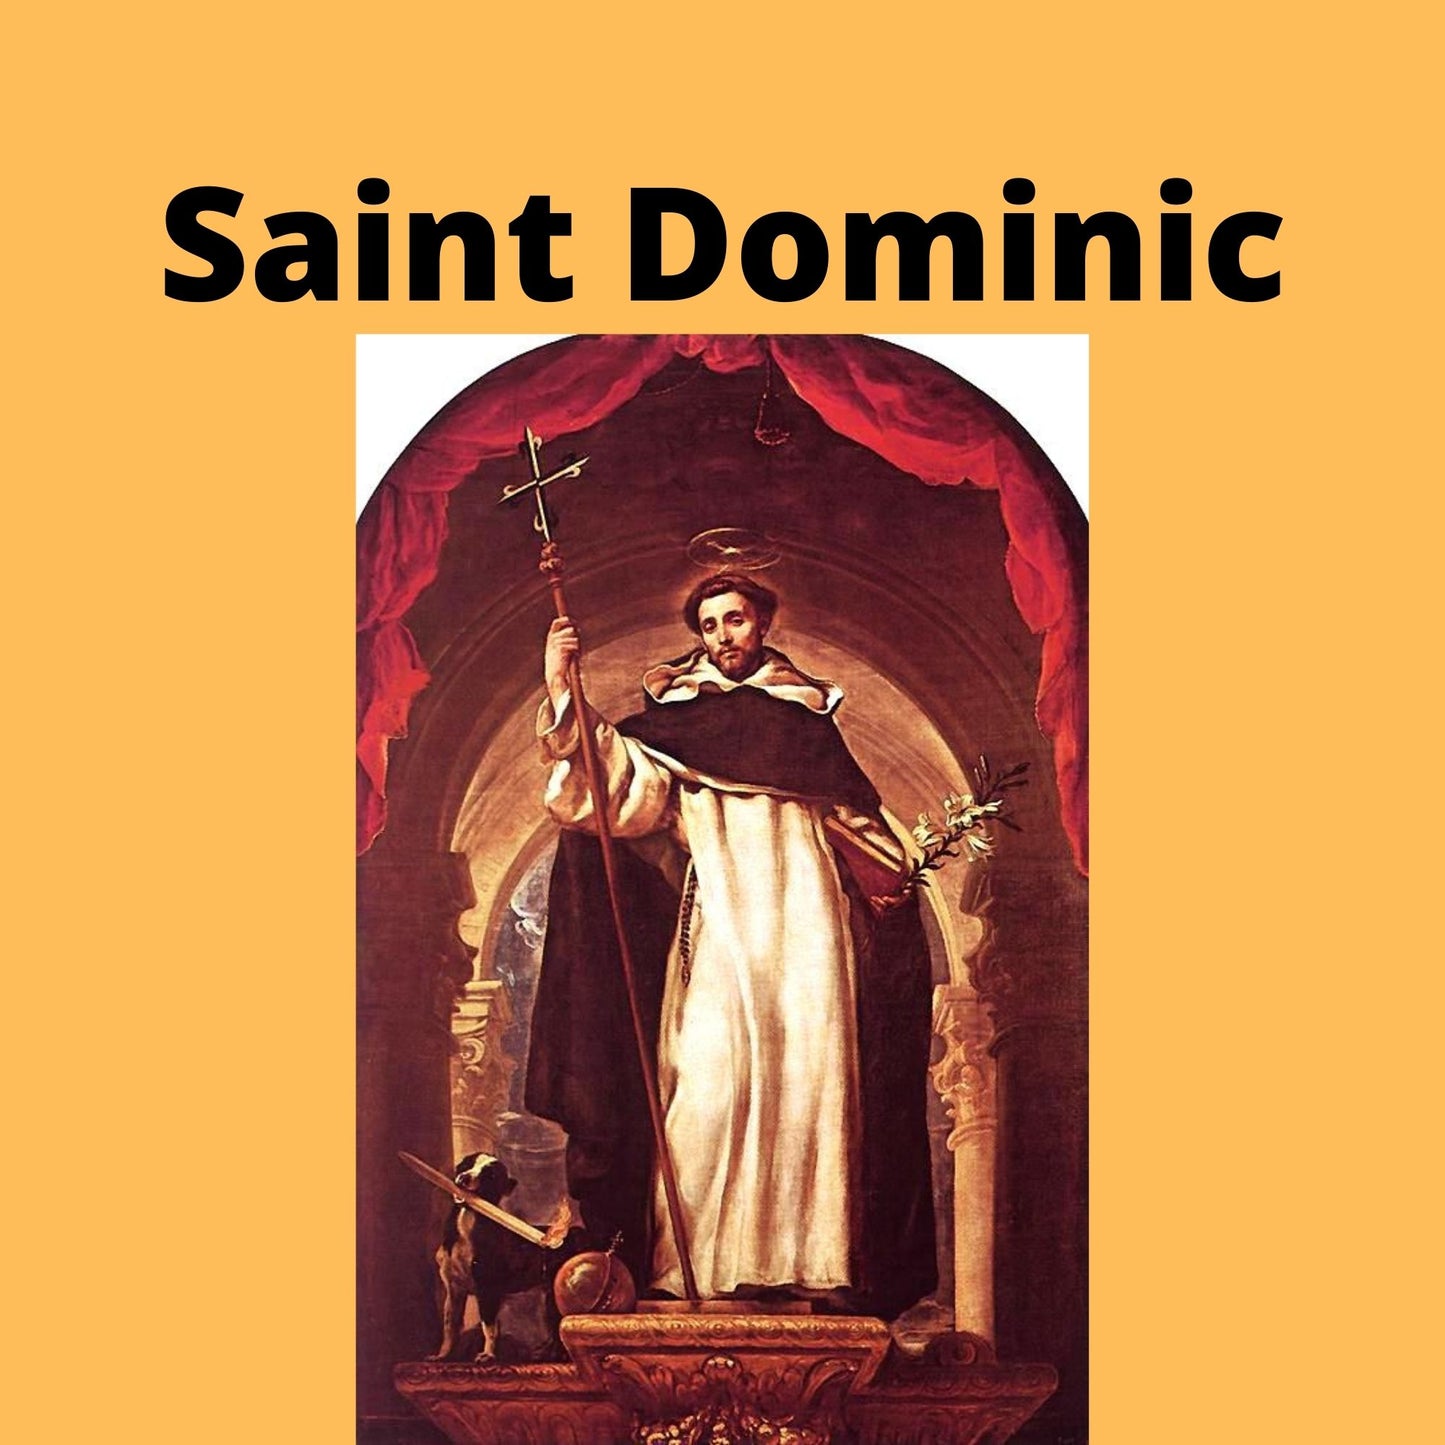 Saint Dominic Video Download MP4 - Bob and Penny Lord